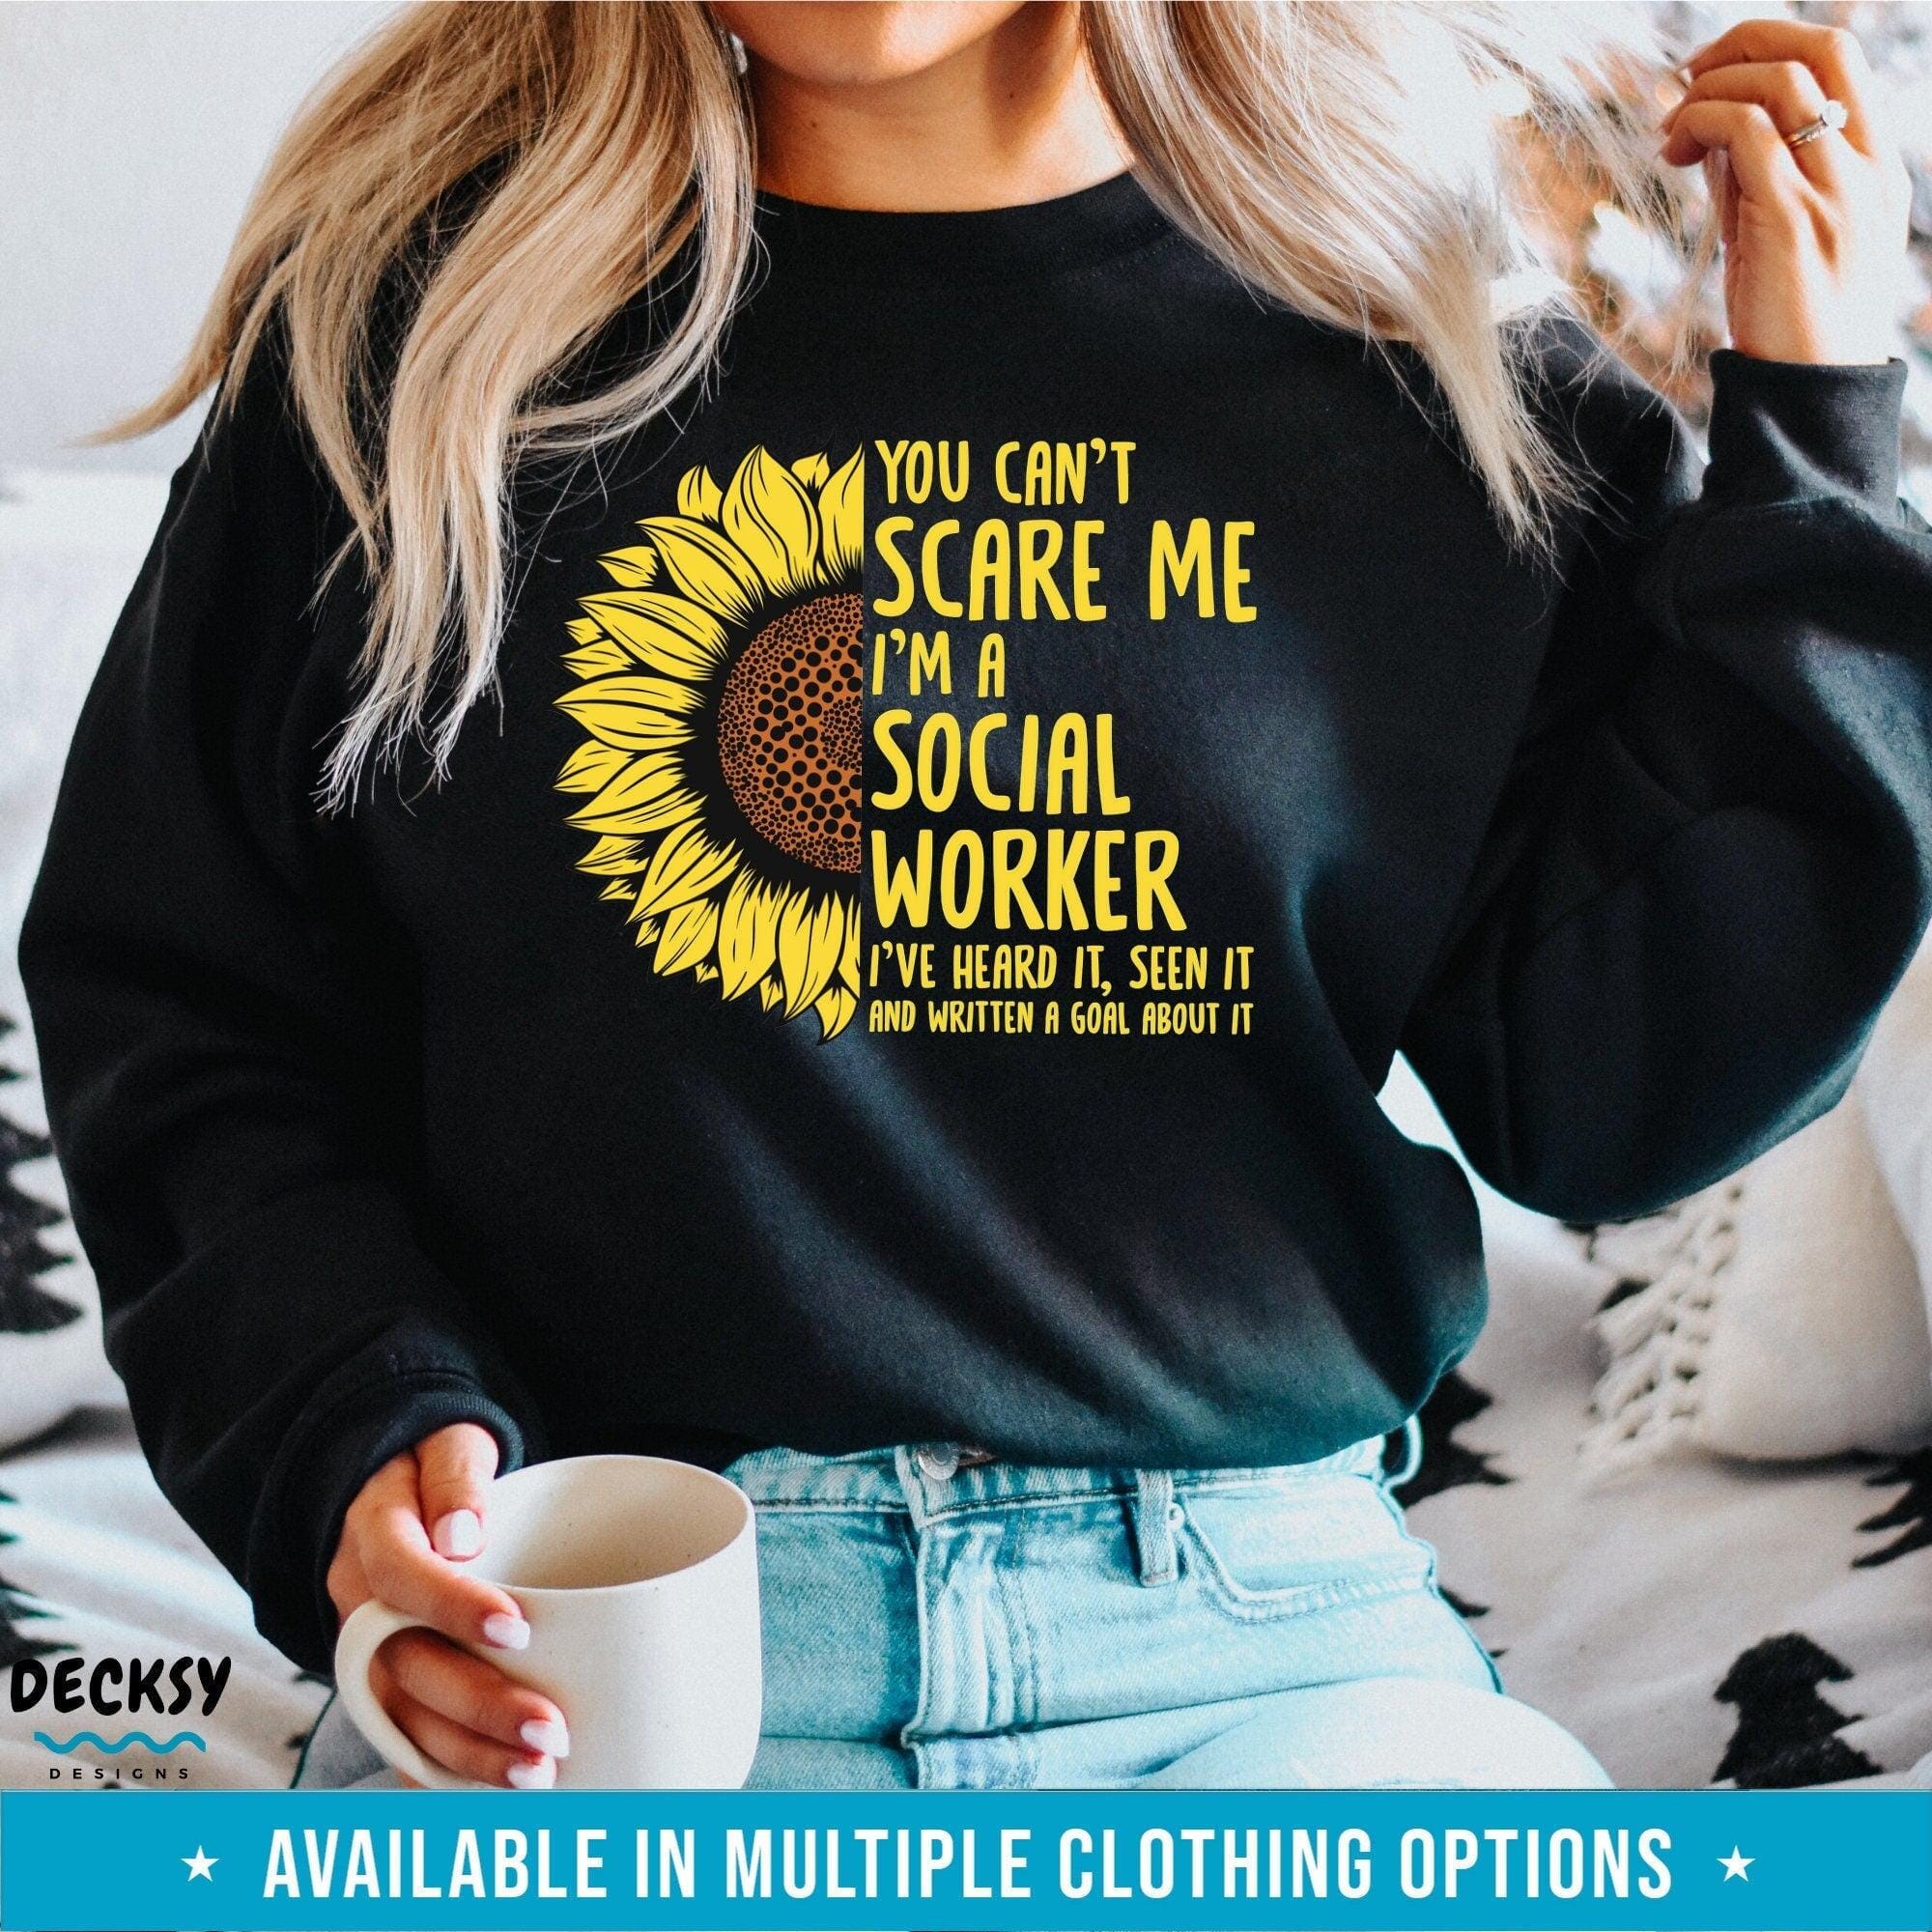 Social Worker Tshirt, Social Work Gift-Clothing:Gender-Neutral Adult Clothing:Tops & Tees:T-shirts:Graphic Tees-DecksyDesigns